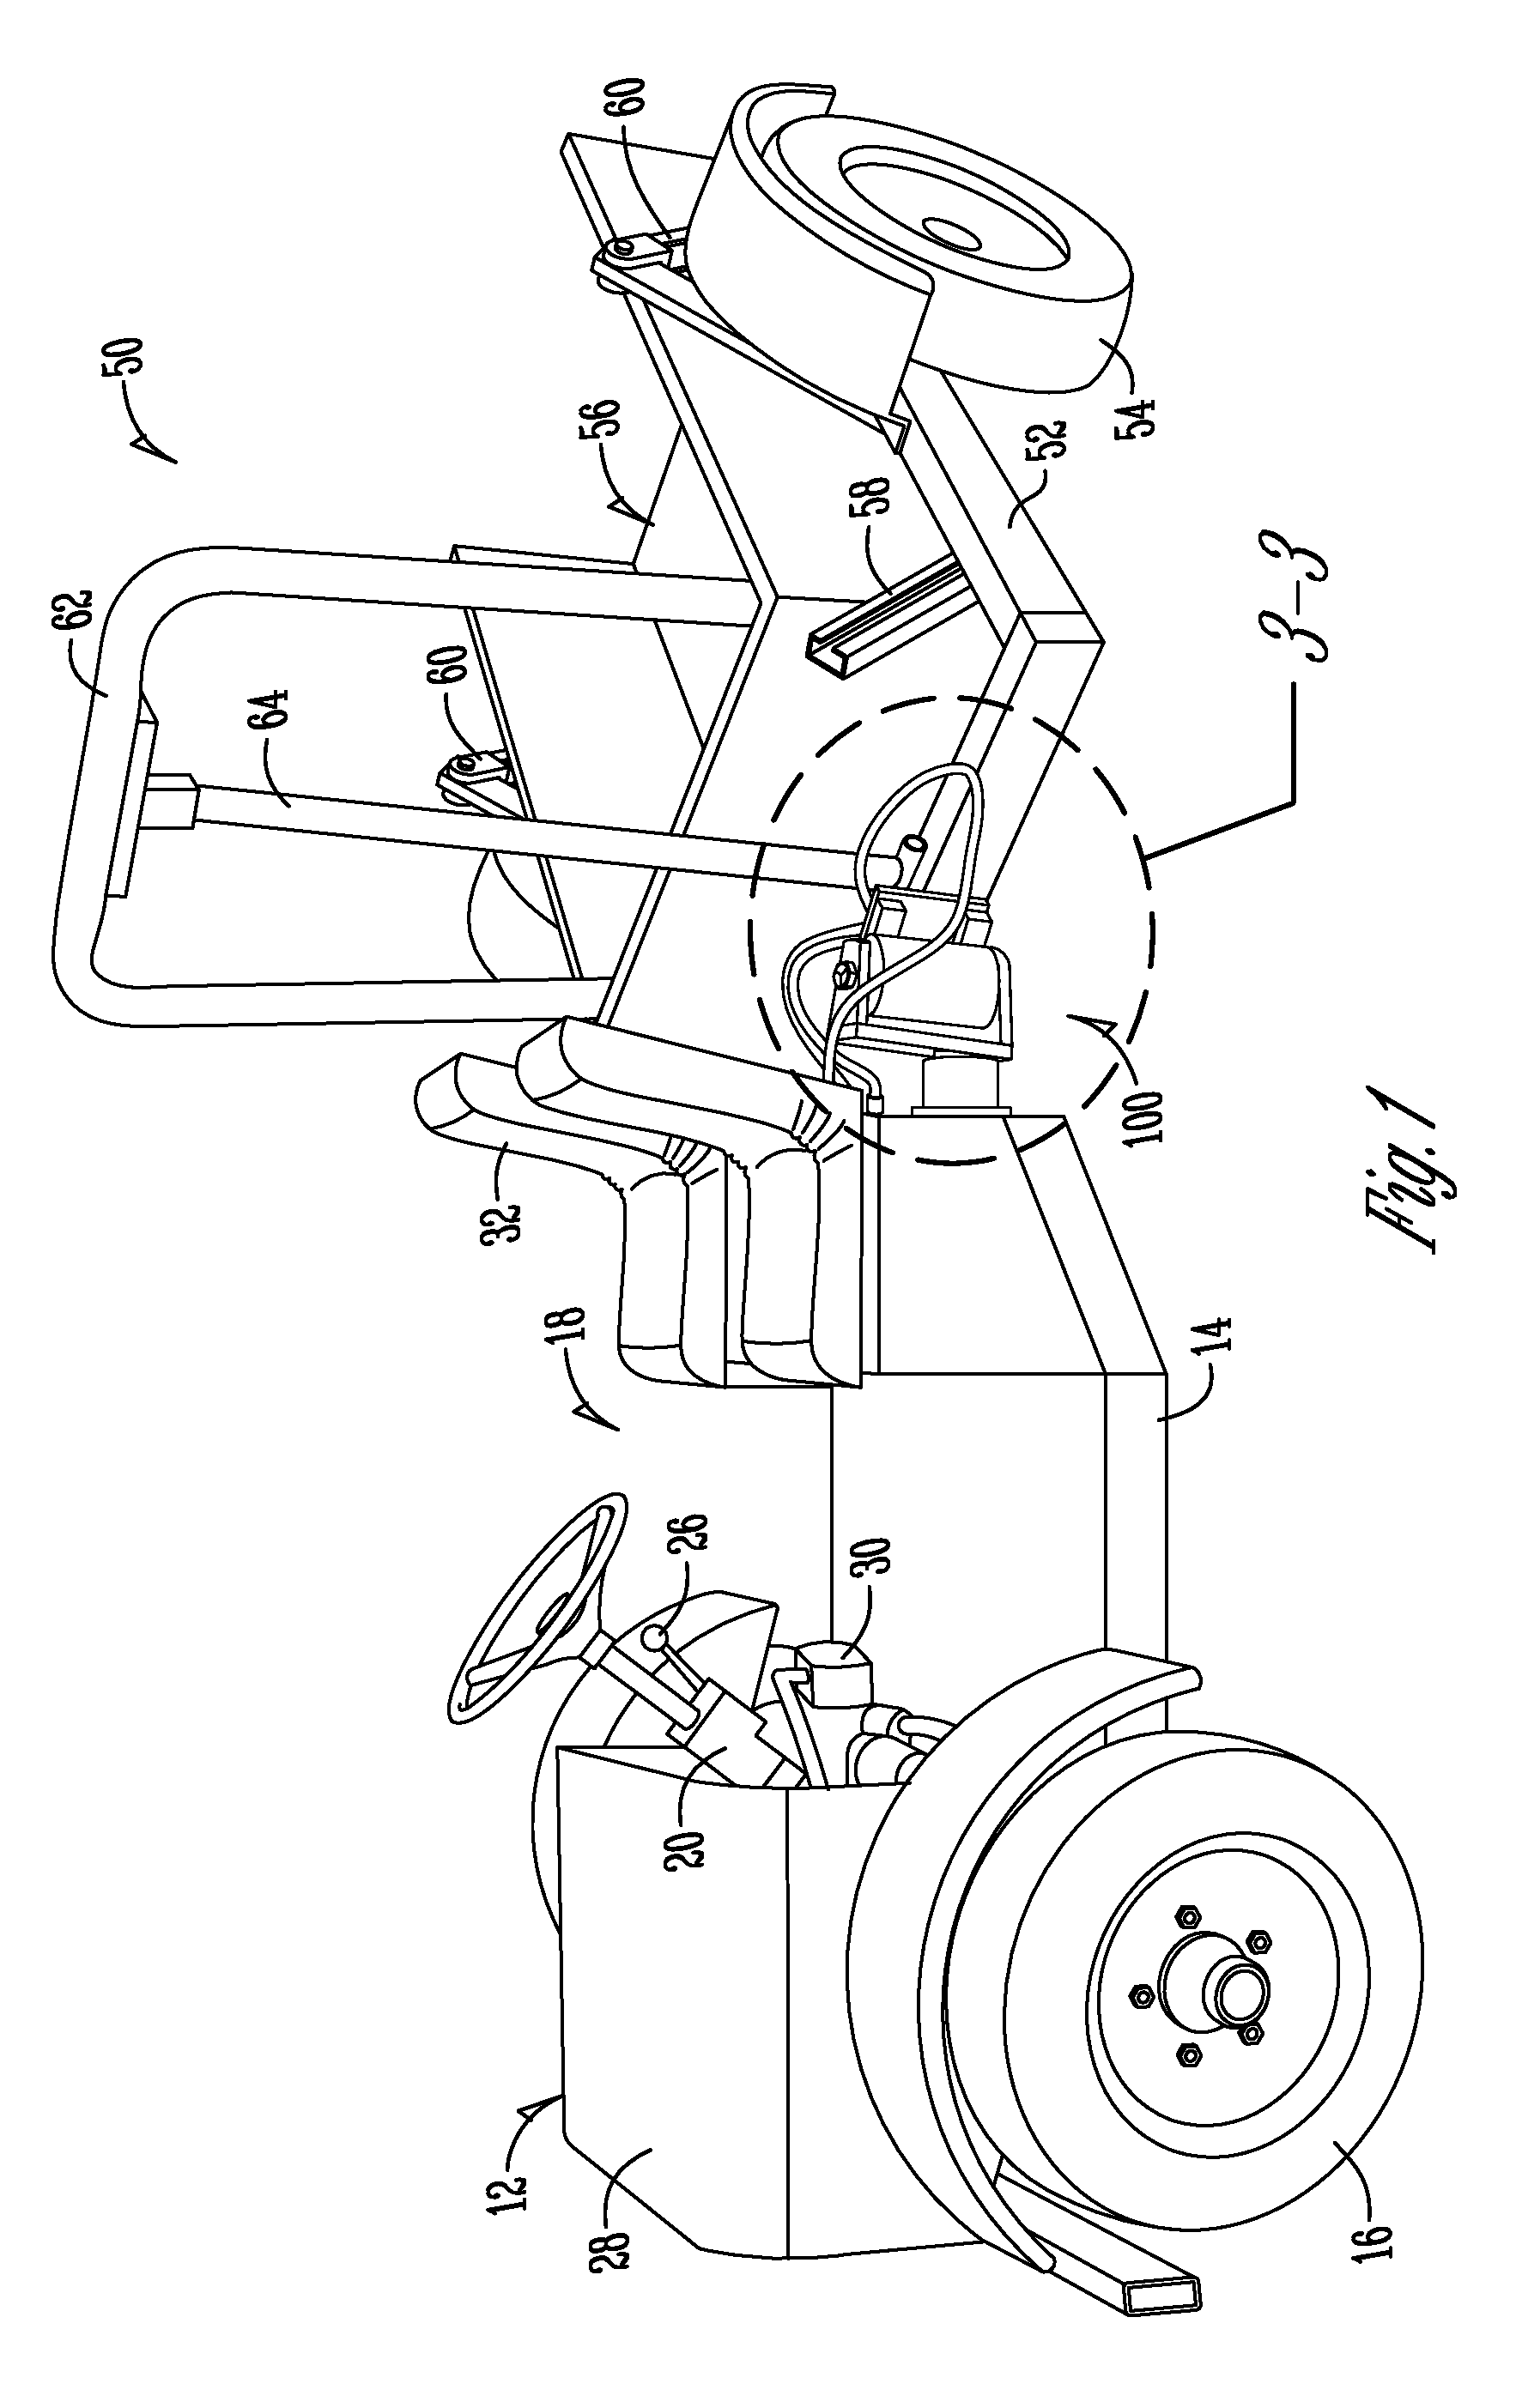 Center-pivot steering articulated vehicle